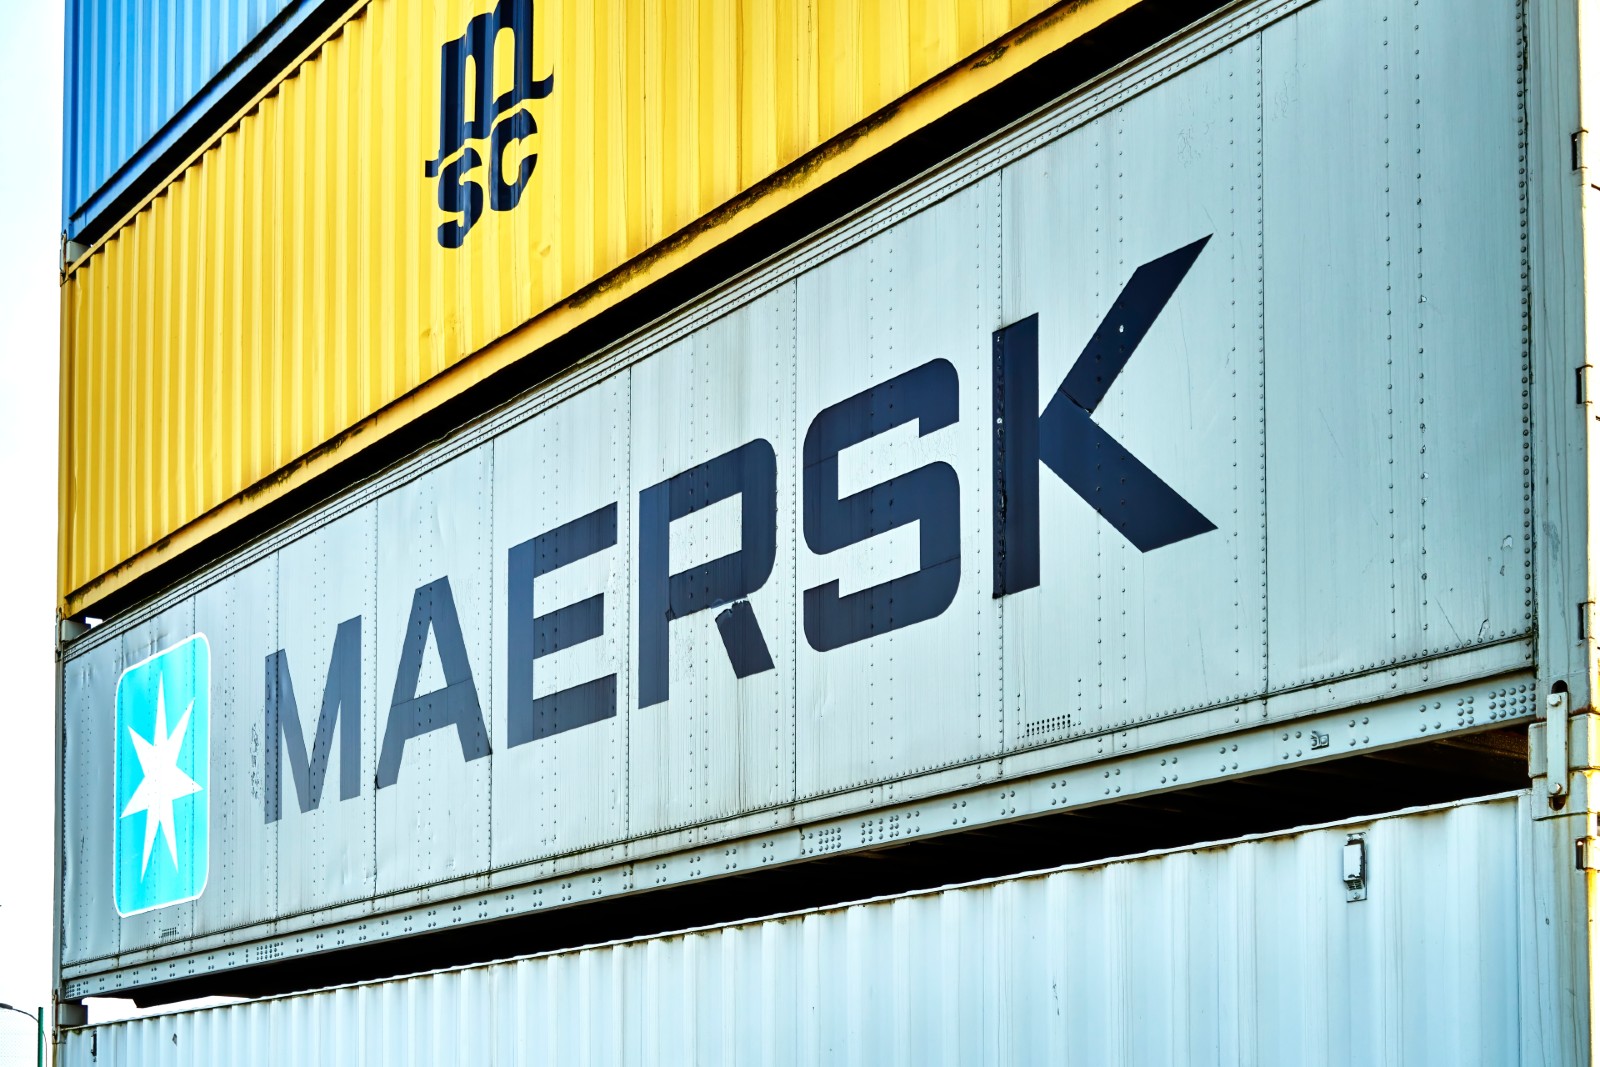 Egypt: Maersk Sets to launch $15 bn network for green energy, clean fuel